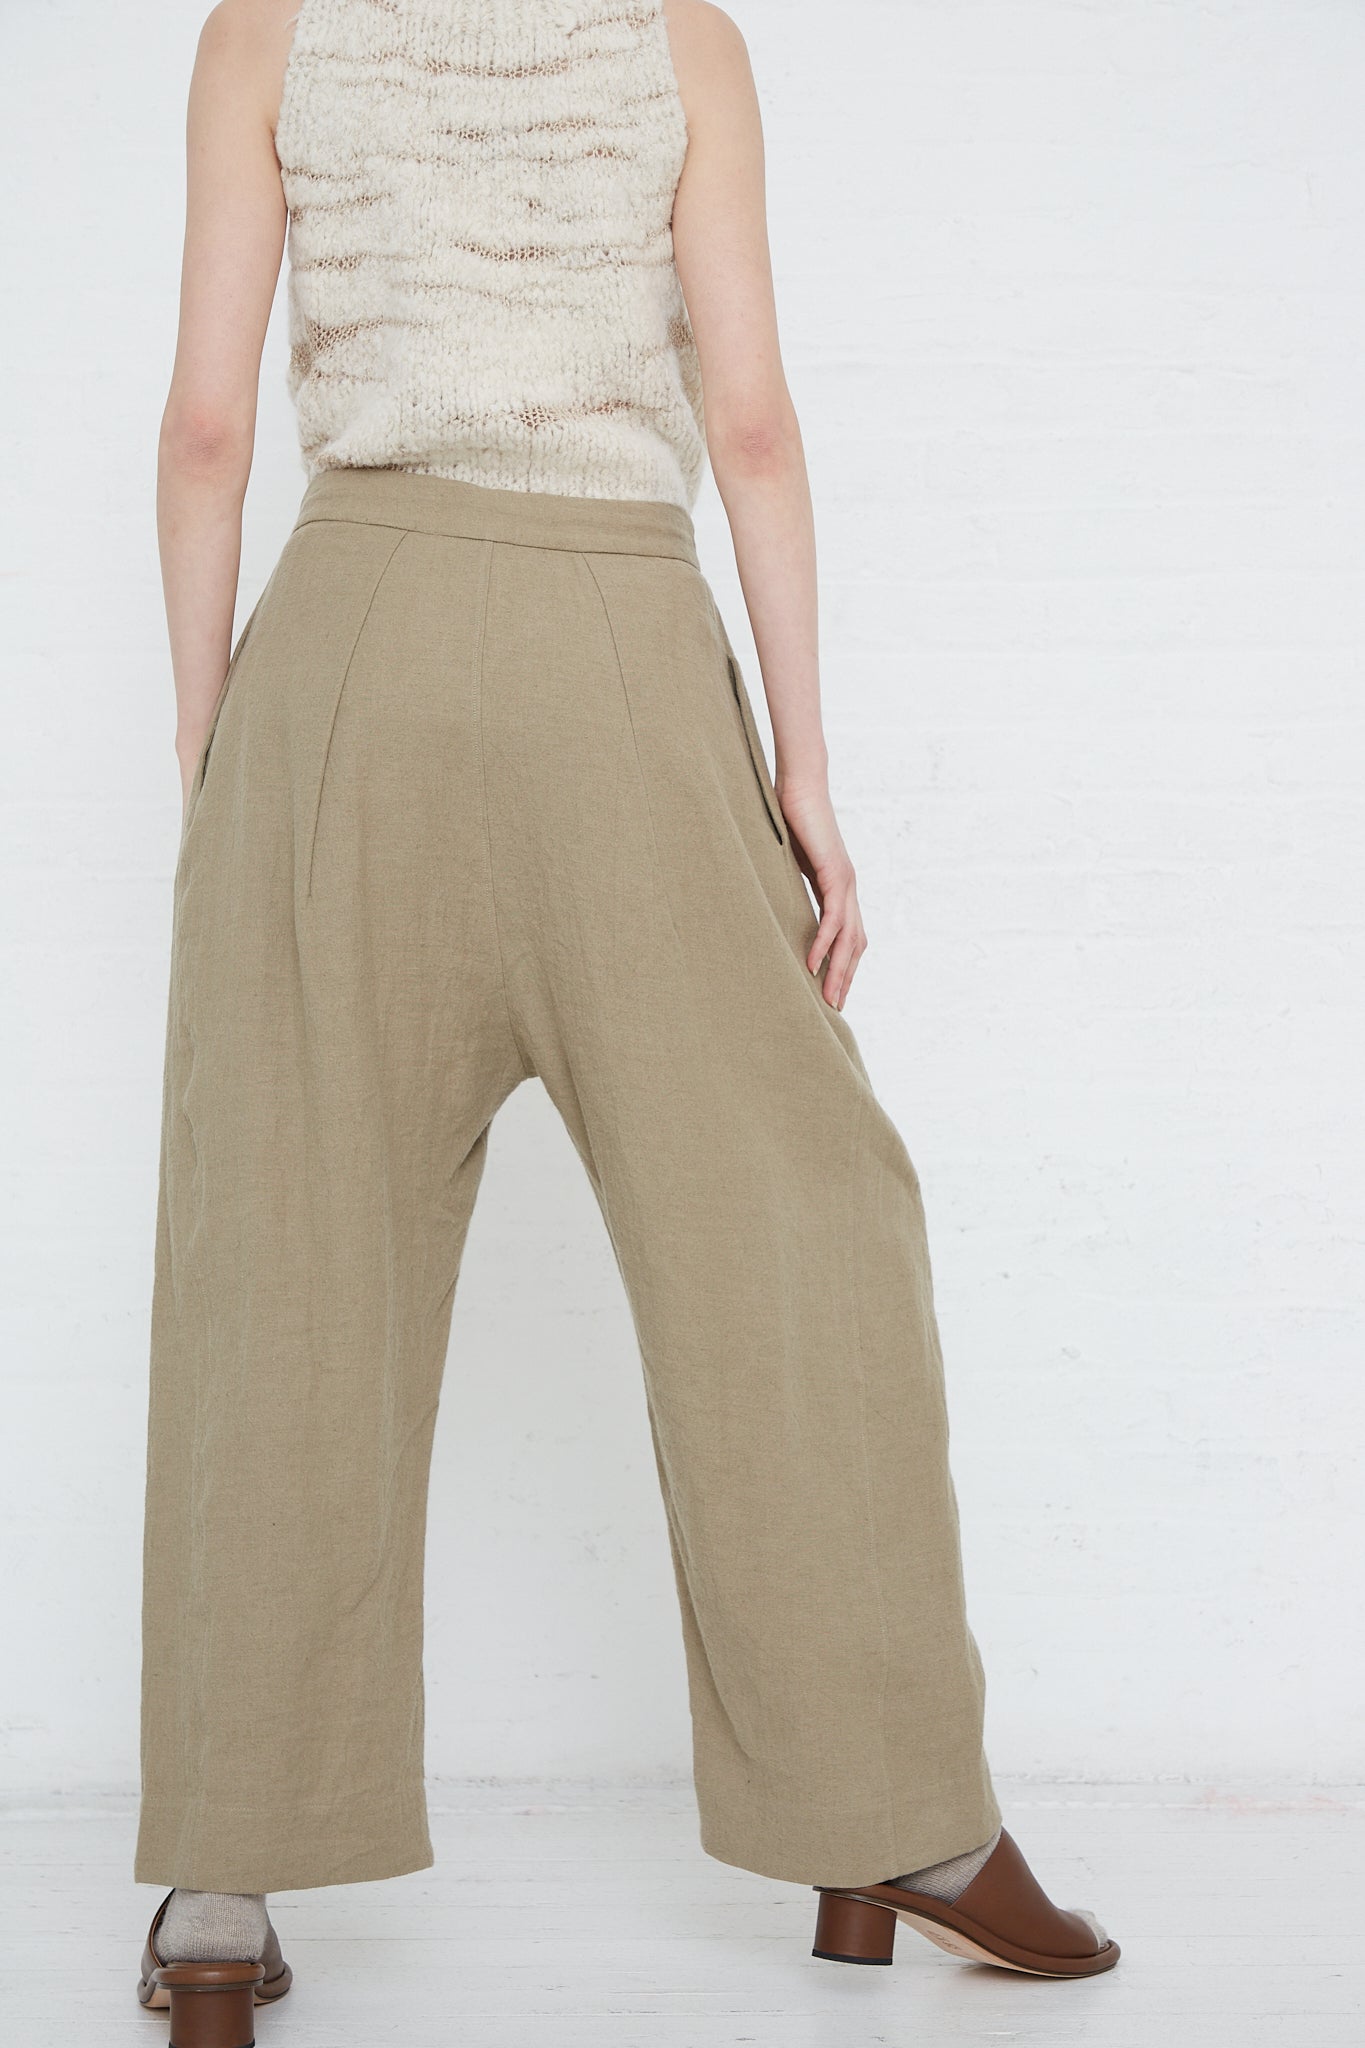 The back view of a woman wearing Lauren Manoogian's Linen and Wool Como Trouser in Clay.